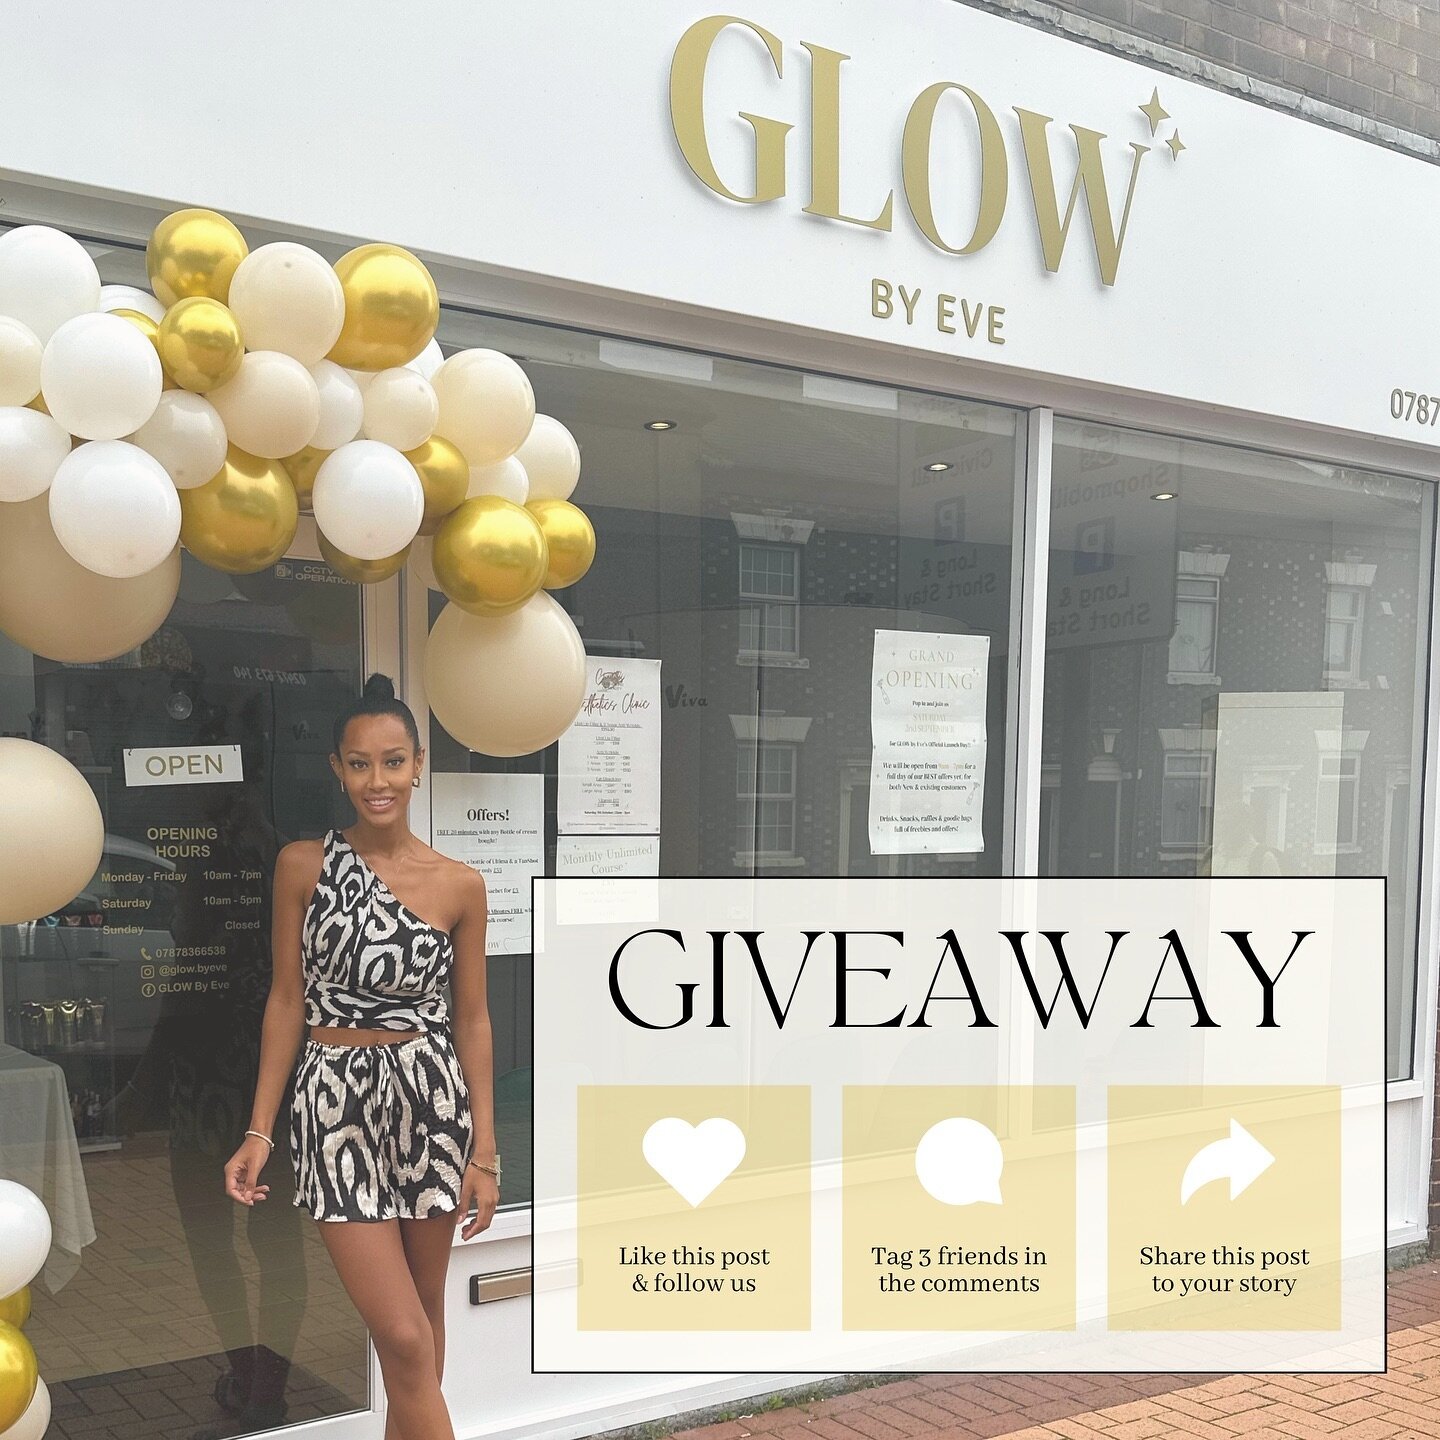 GLOW By Eve has nearly been open a whole year!! ✨
And to show our appreciation for all your amazing support this past year, there will be a chance to win the following:

- 30 min bulk course 
- 30 min bulk course
- 60 min bulk course 
- Bottle of Non